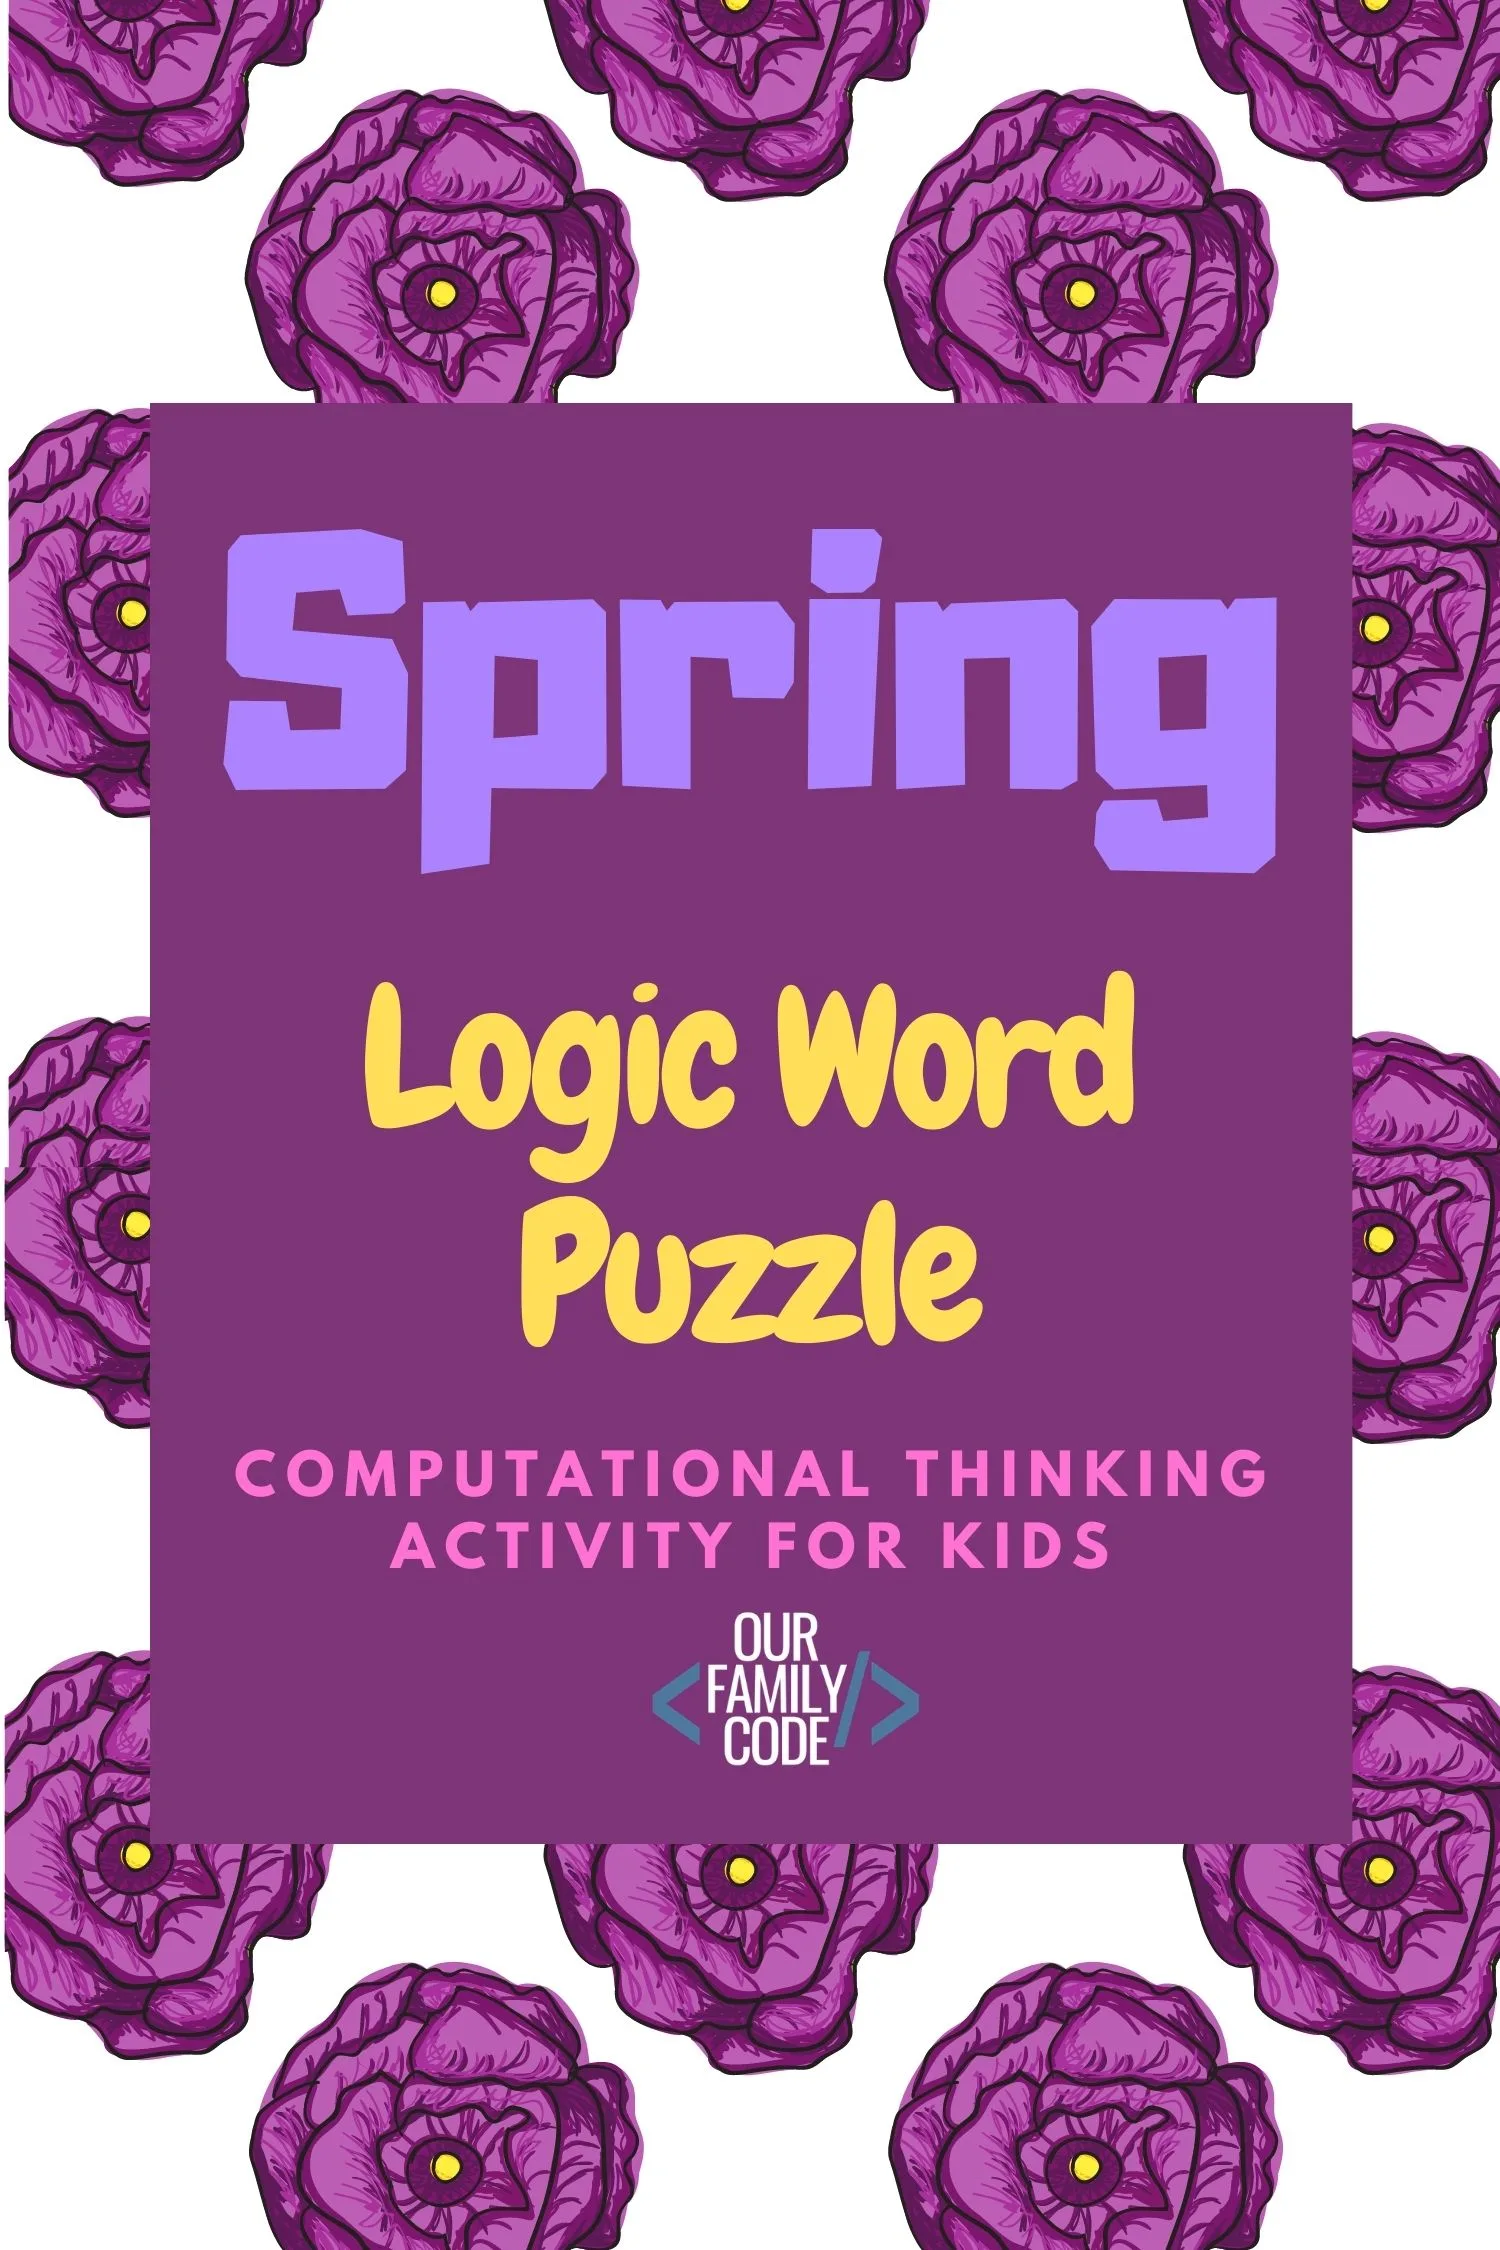 A picture of purple flowers in background with text that says "Spring logic word puzzle".